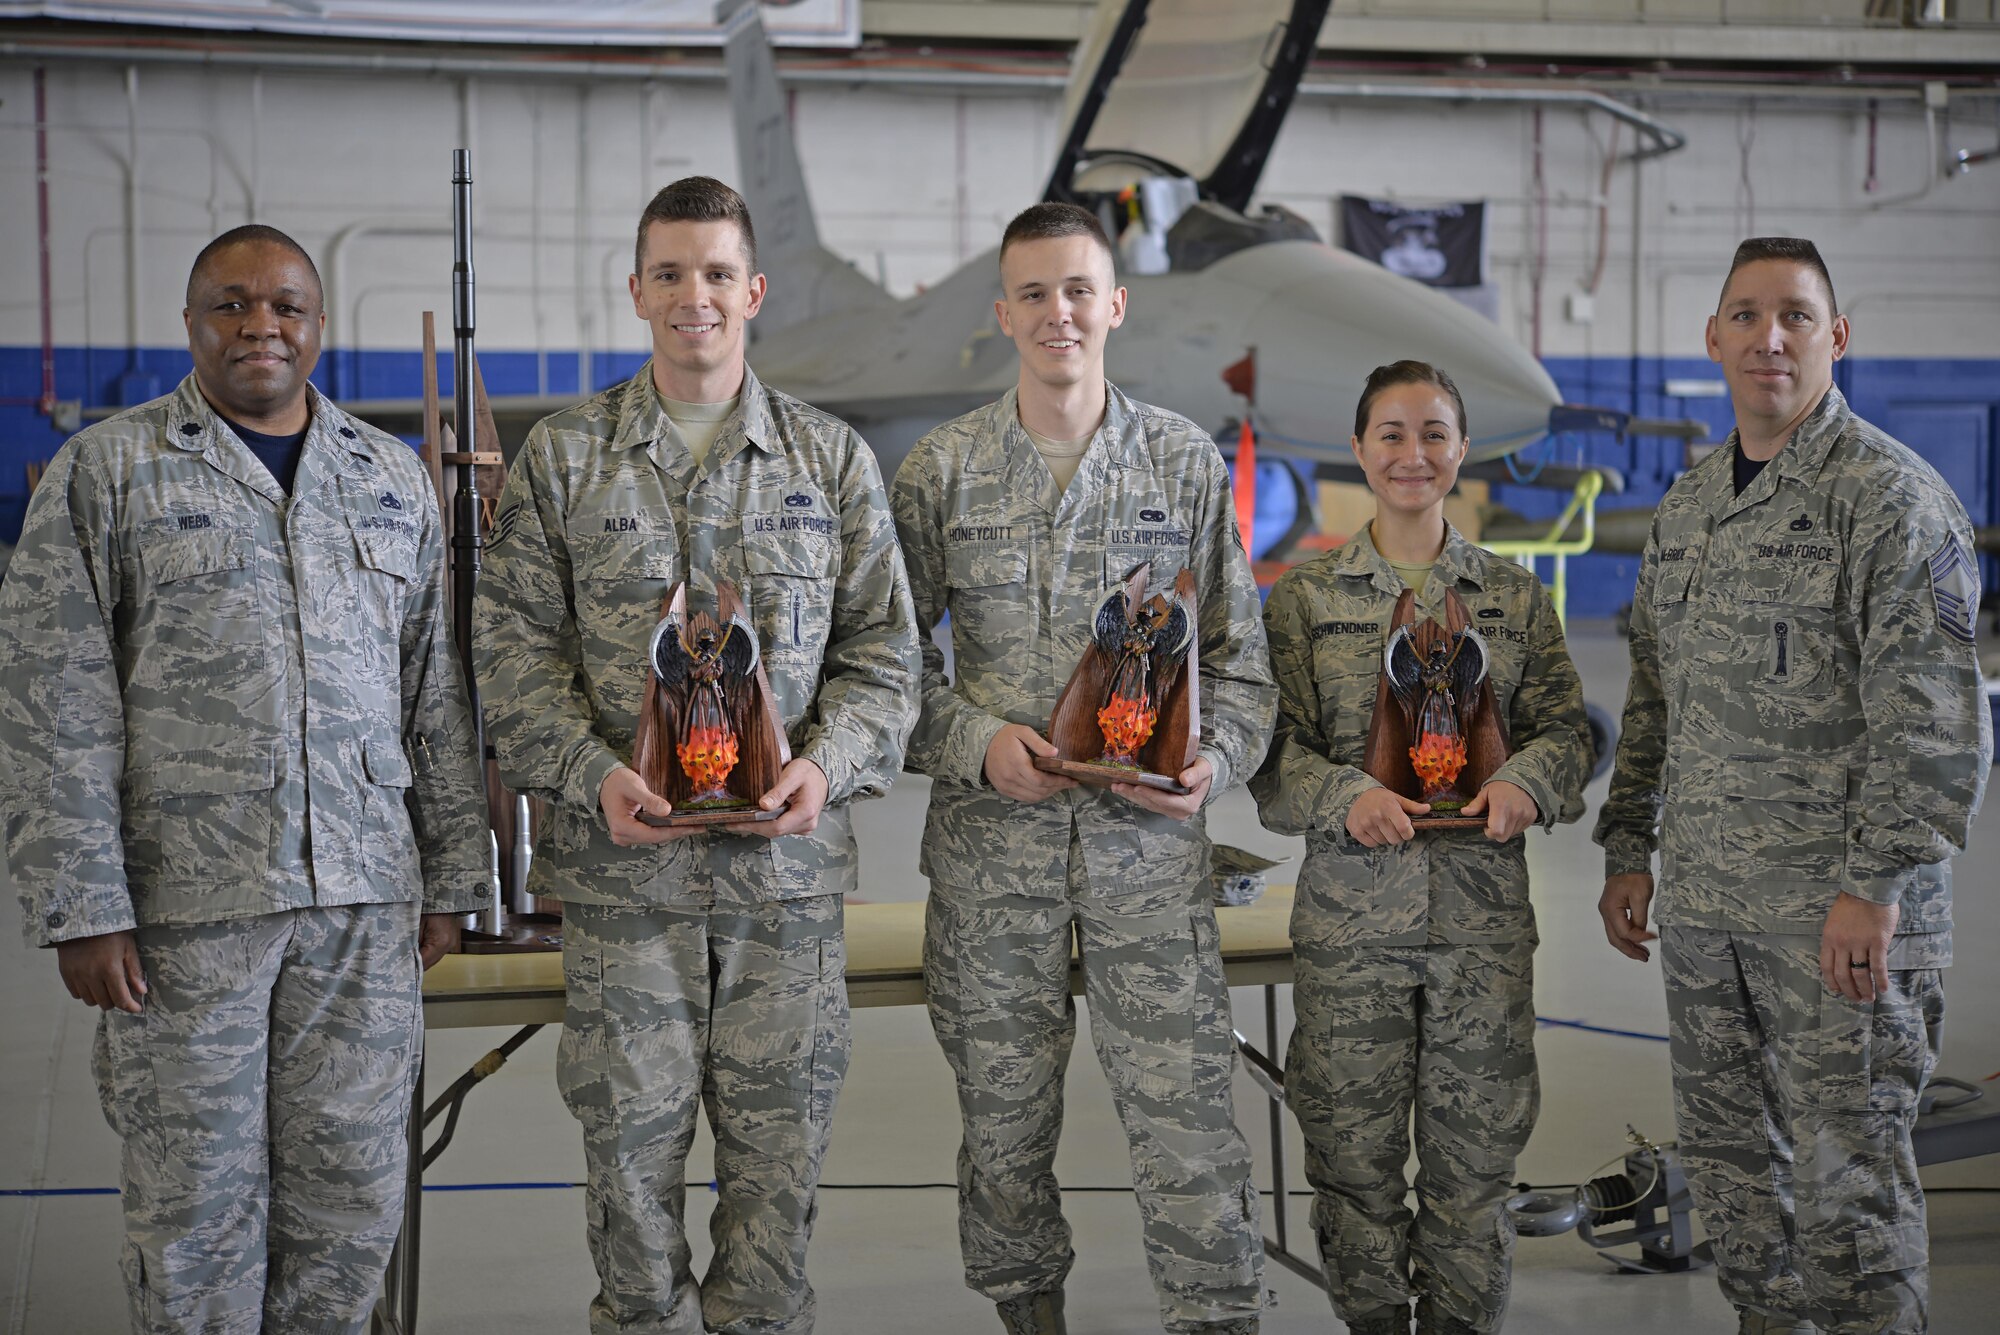 Load crew four from the 33rd Fighter Wing accept trophies after winning the base wide load competition at Eglin Air Force Base, Fla., March 18, 2016. Three load teams participated in the first base wide load competition between the 33rd FW and the 96th Test Wing involving the F-35A Lightning II. During this competition the F-35, F-15 Eagle and F-16 Fighting Falcon were used to test teams on their skills at loading munition onto an aircraft. (U.S. Air Force photo/Staff Sgt. Tarelle Walker)